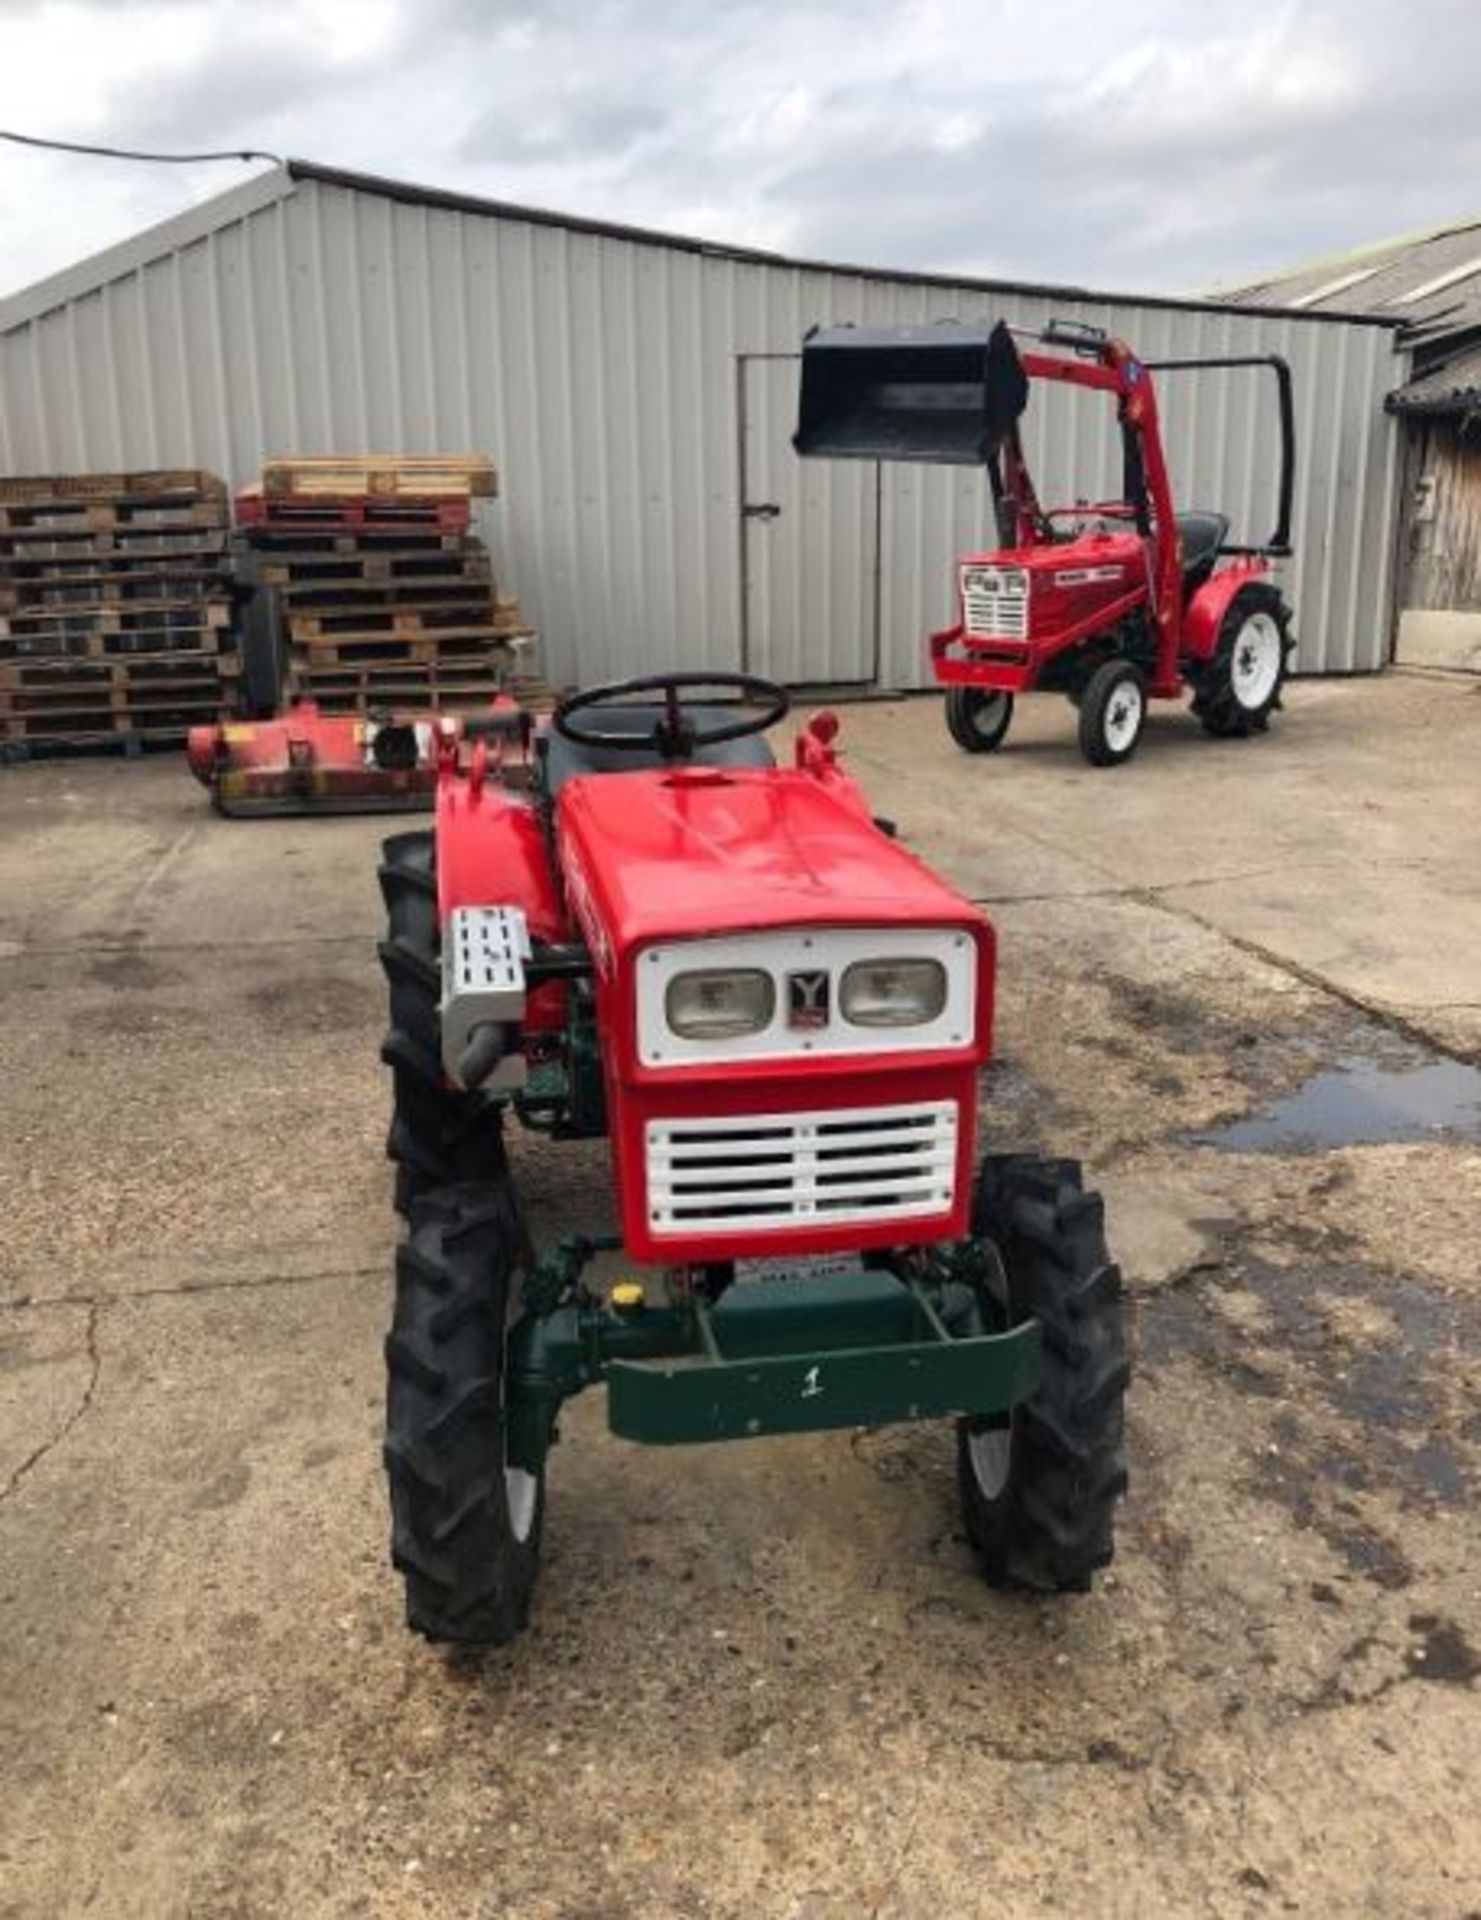 COMPACT TRACTOR YANMAR 1300D, 4X4, DIESEL, 4 WHEEL DRIVE, REAR PTO, 3 POINT LINKAGE, ONLY 839 HOURS - Image 2 of 5